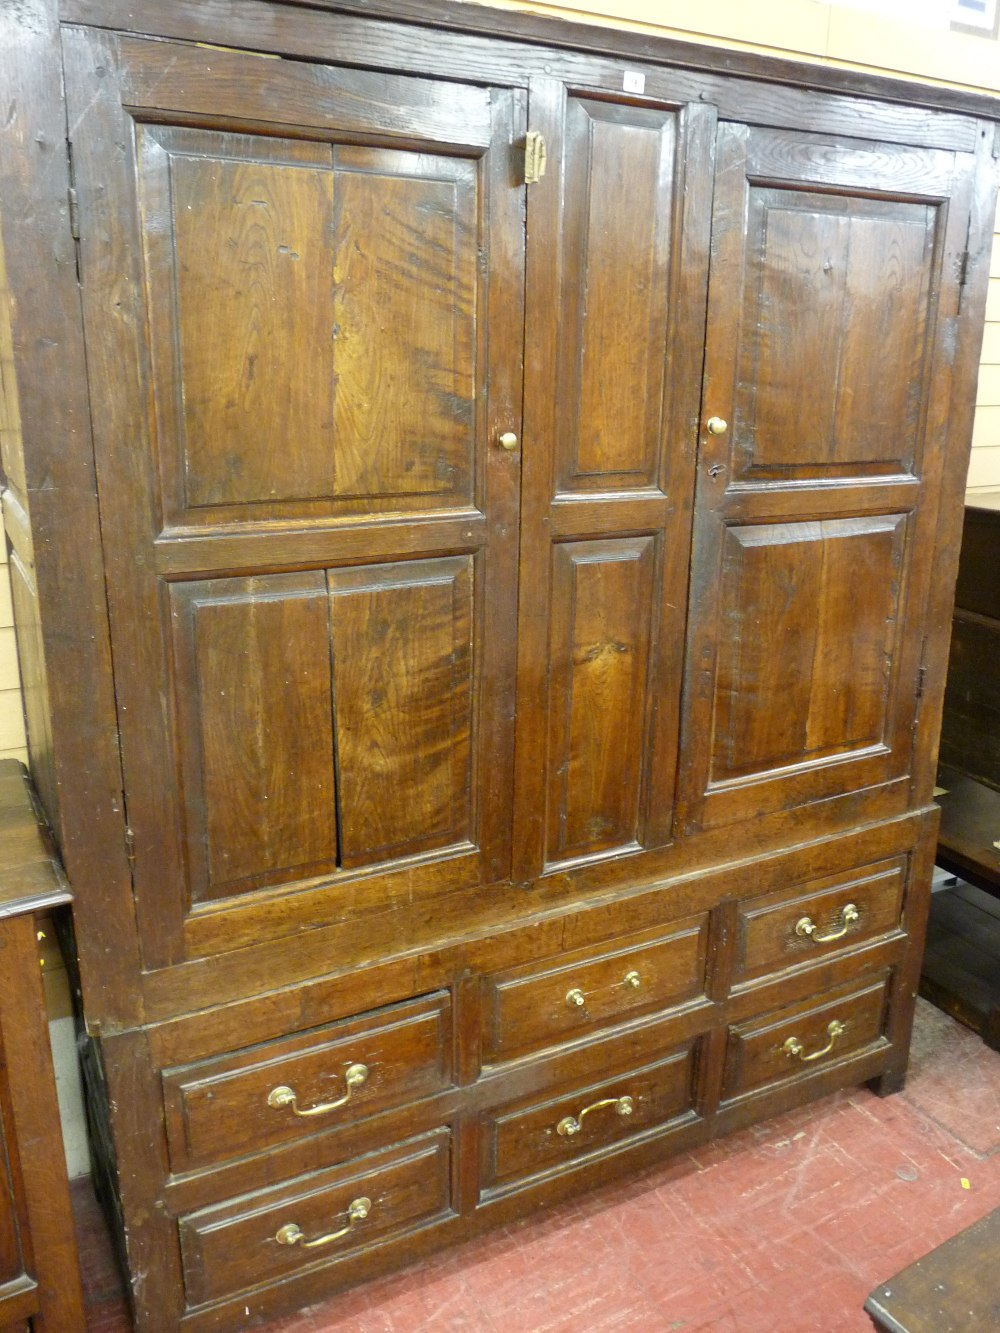 AN 18th CENTURY TWO PIECE WELSH OAK PRESS of wide form, the upper section having two doors, each